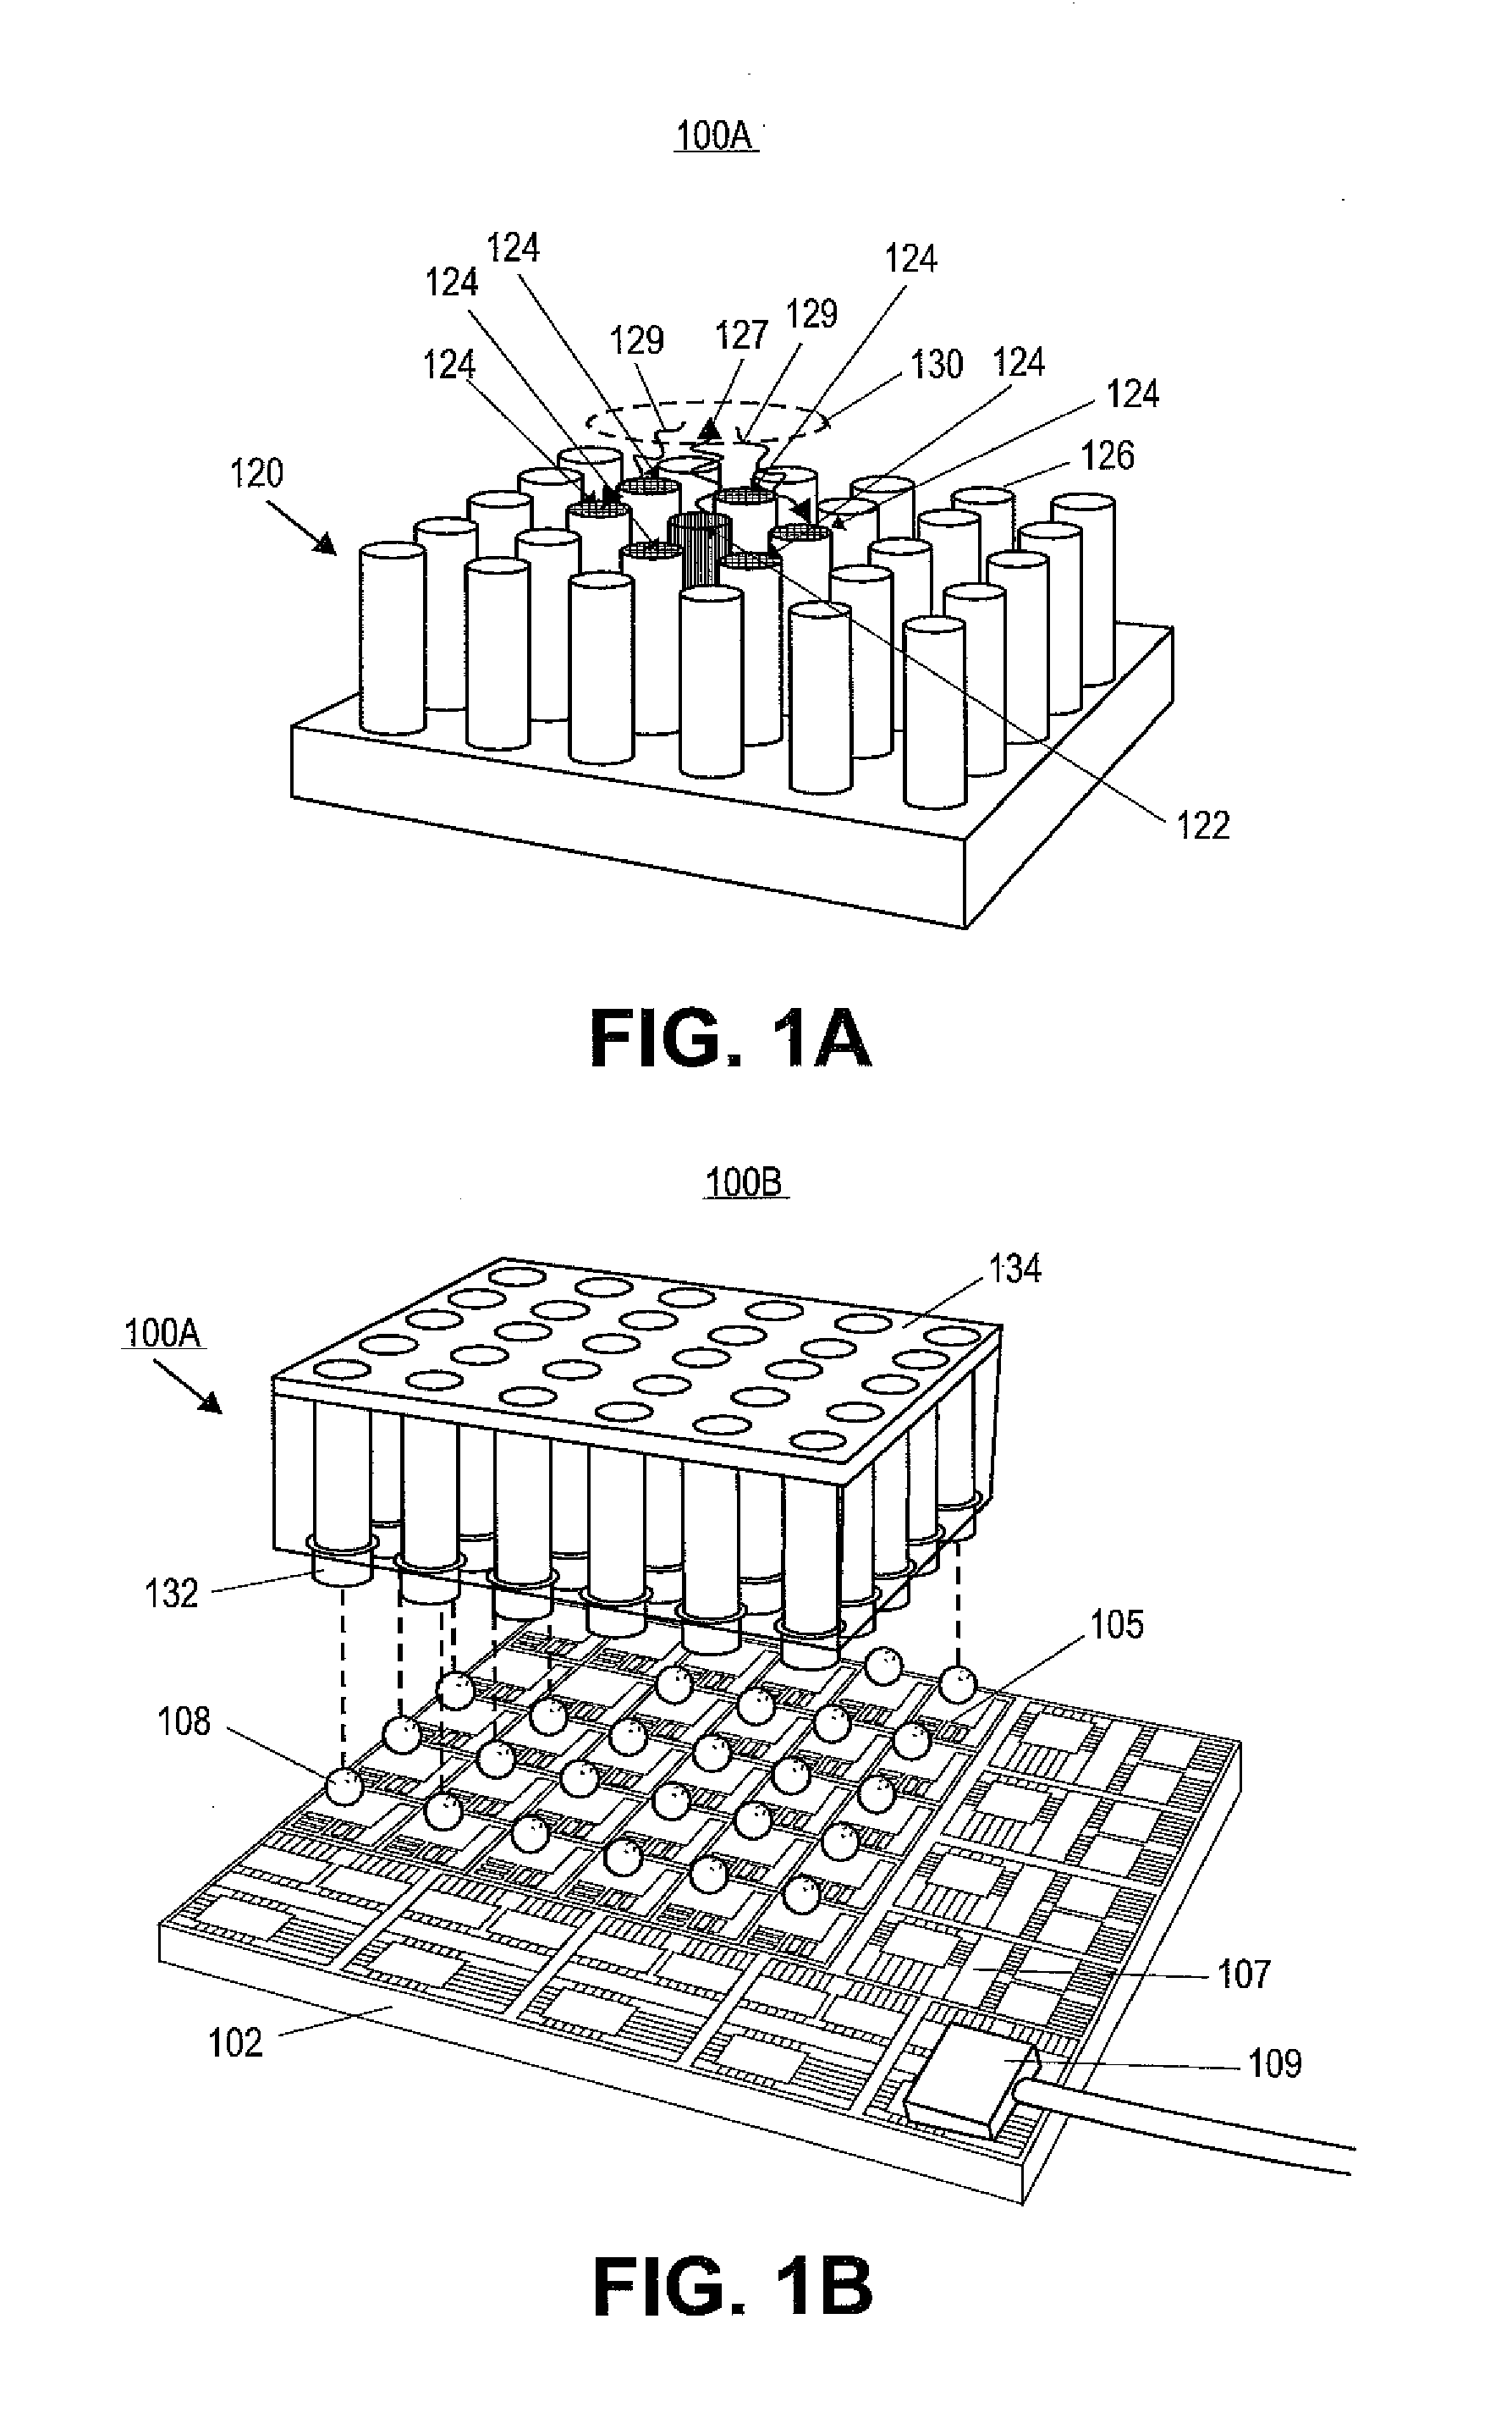 Solid-state microscope